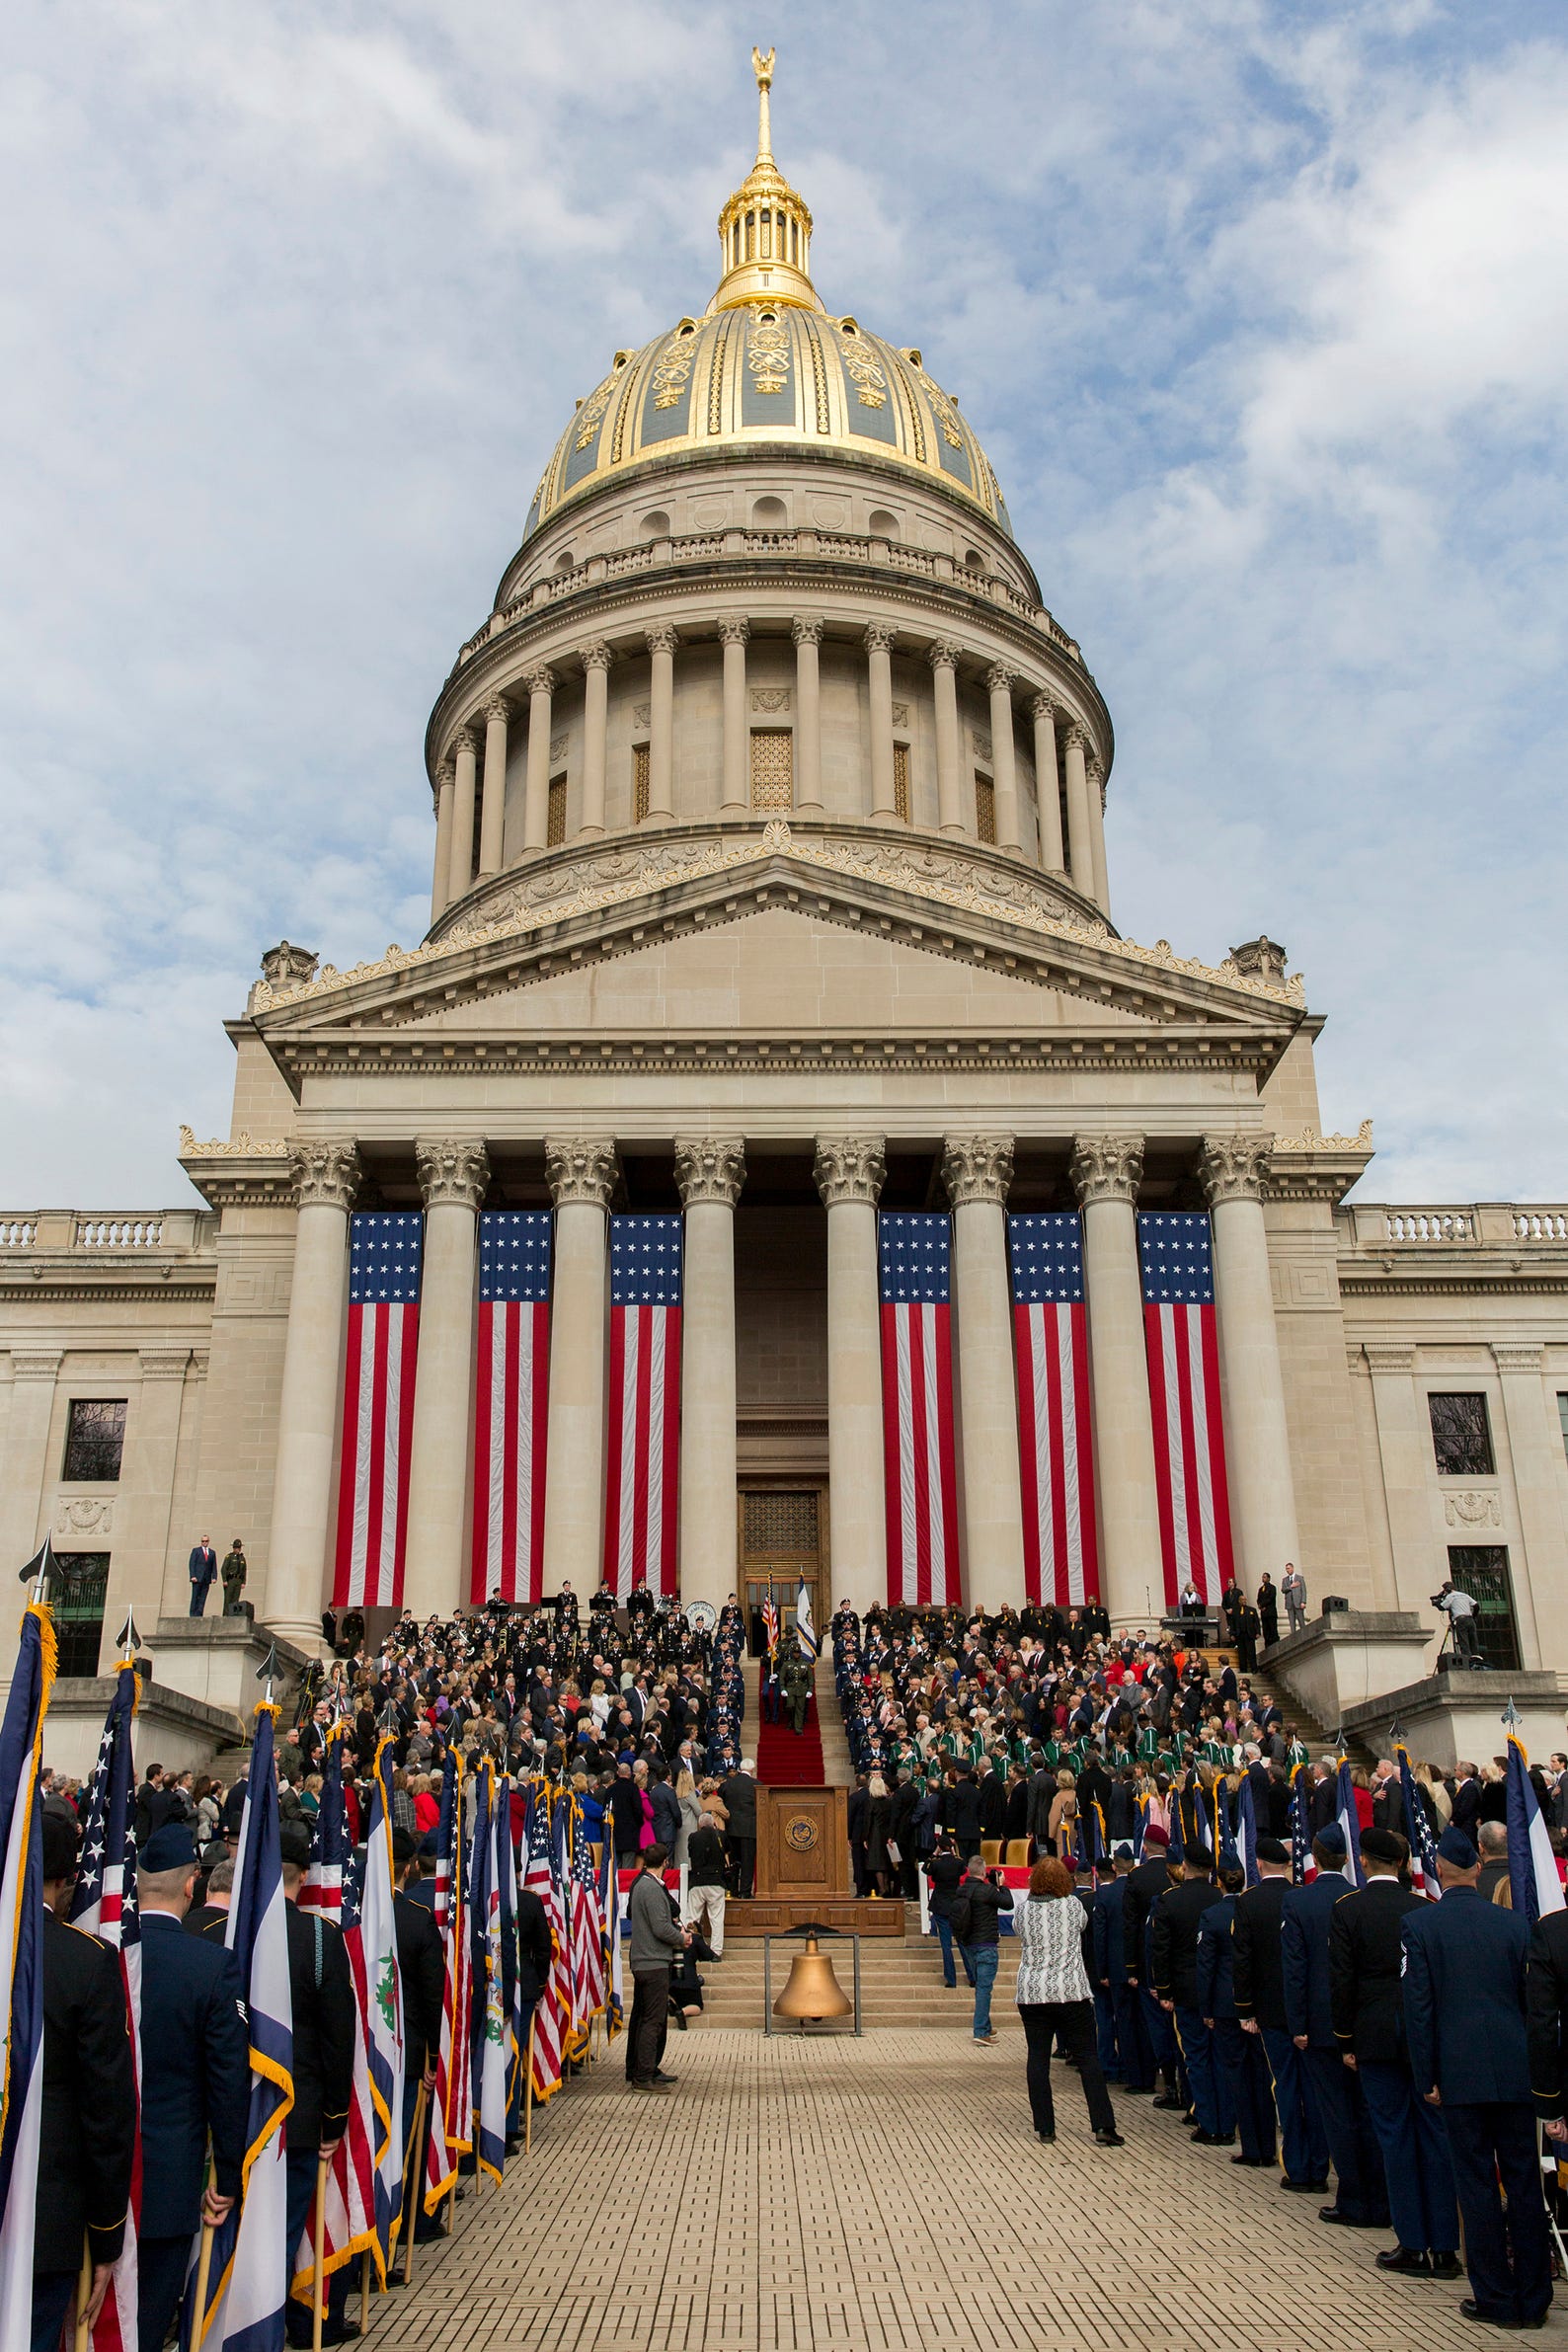 The West Virginia State Capitol Building stands in Charleston, West Virginia. It's home to the West Virginia state government.